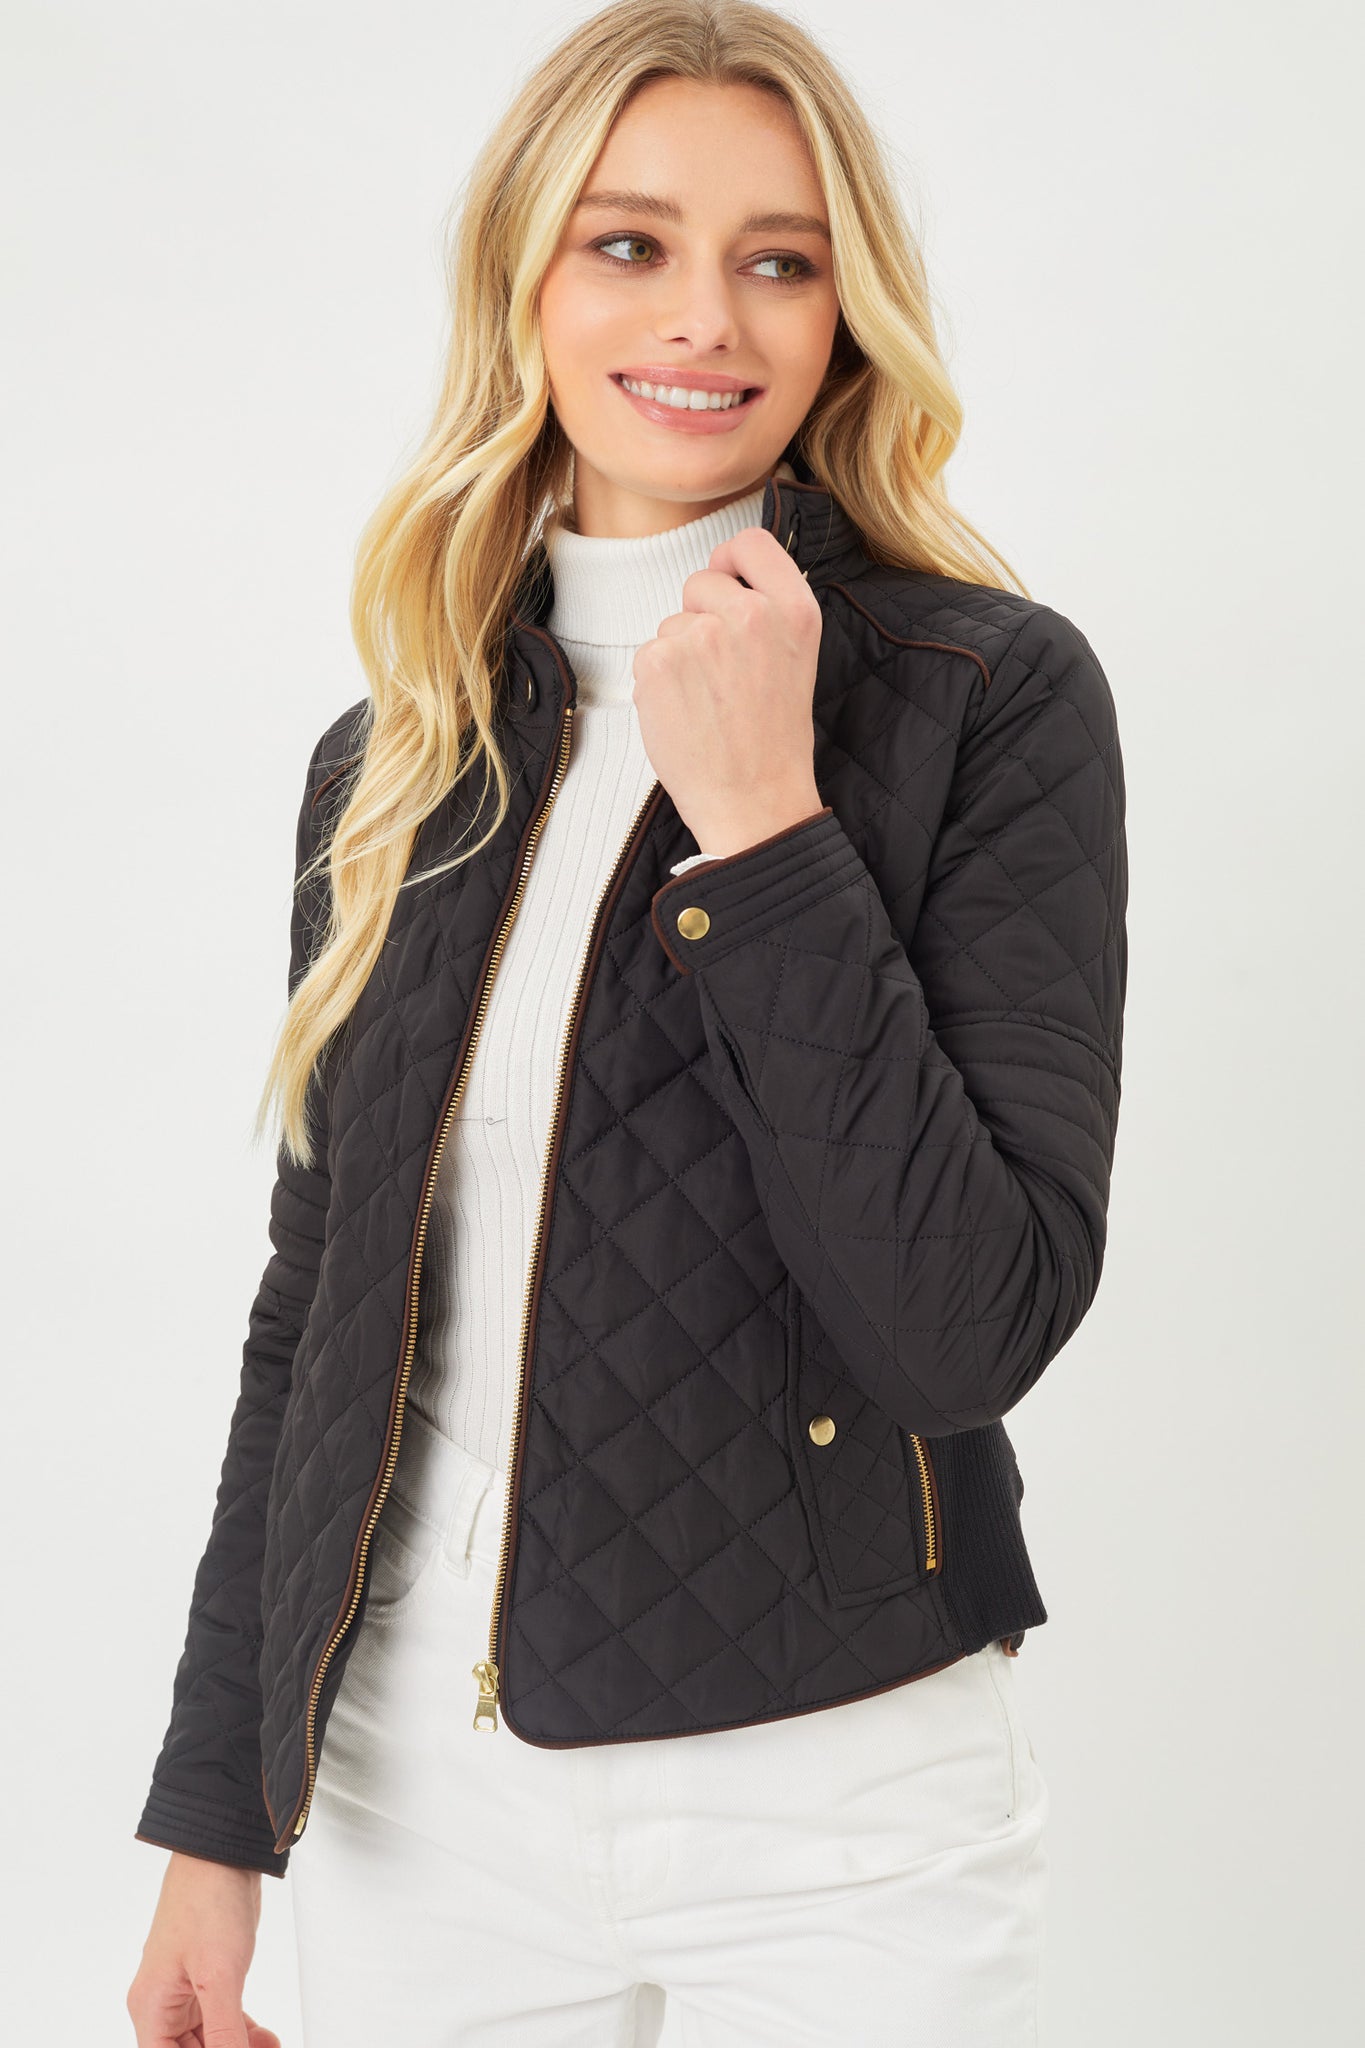 Ultra Lightweight Quilted Padded Zip Up Jacket